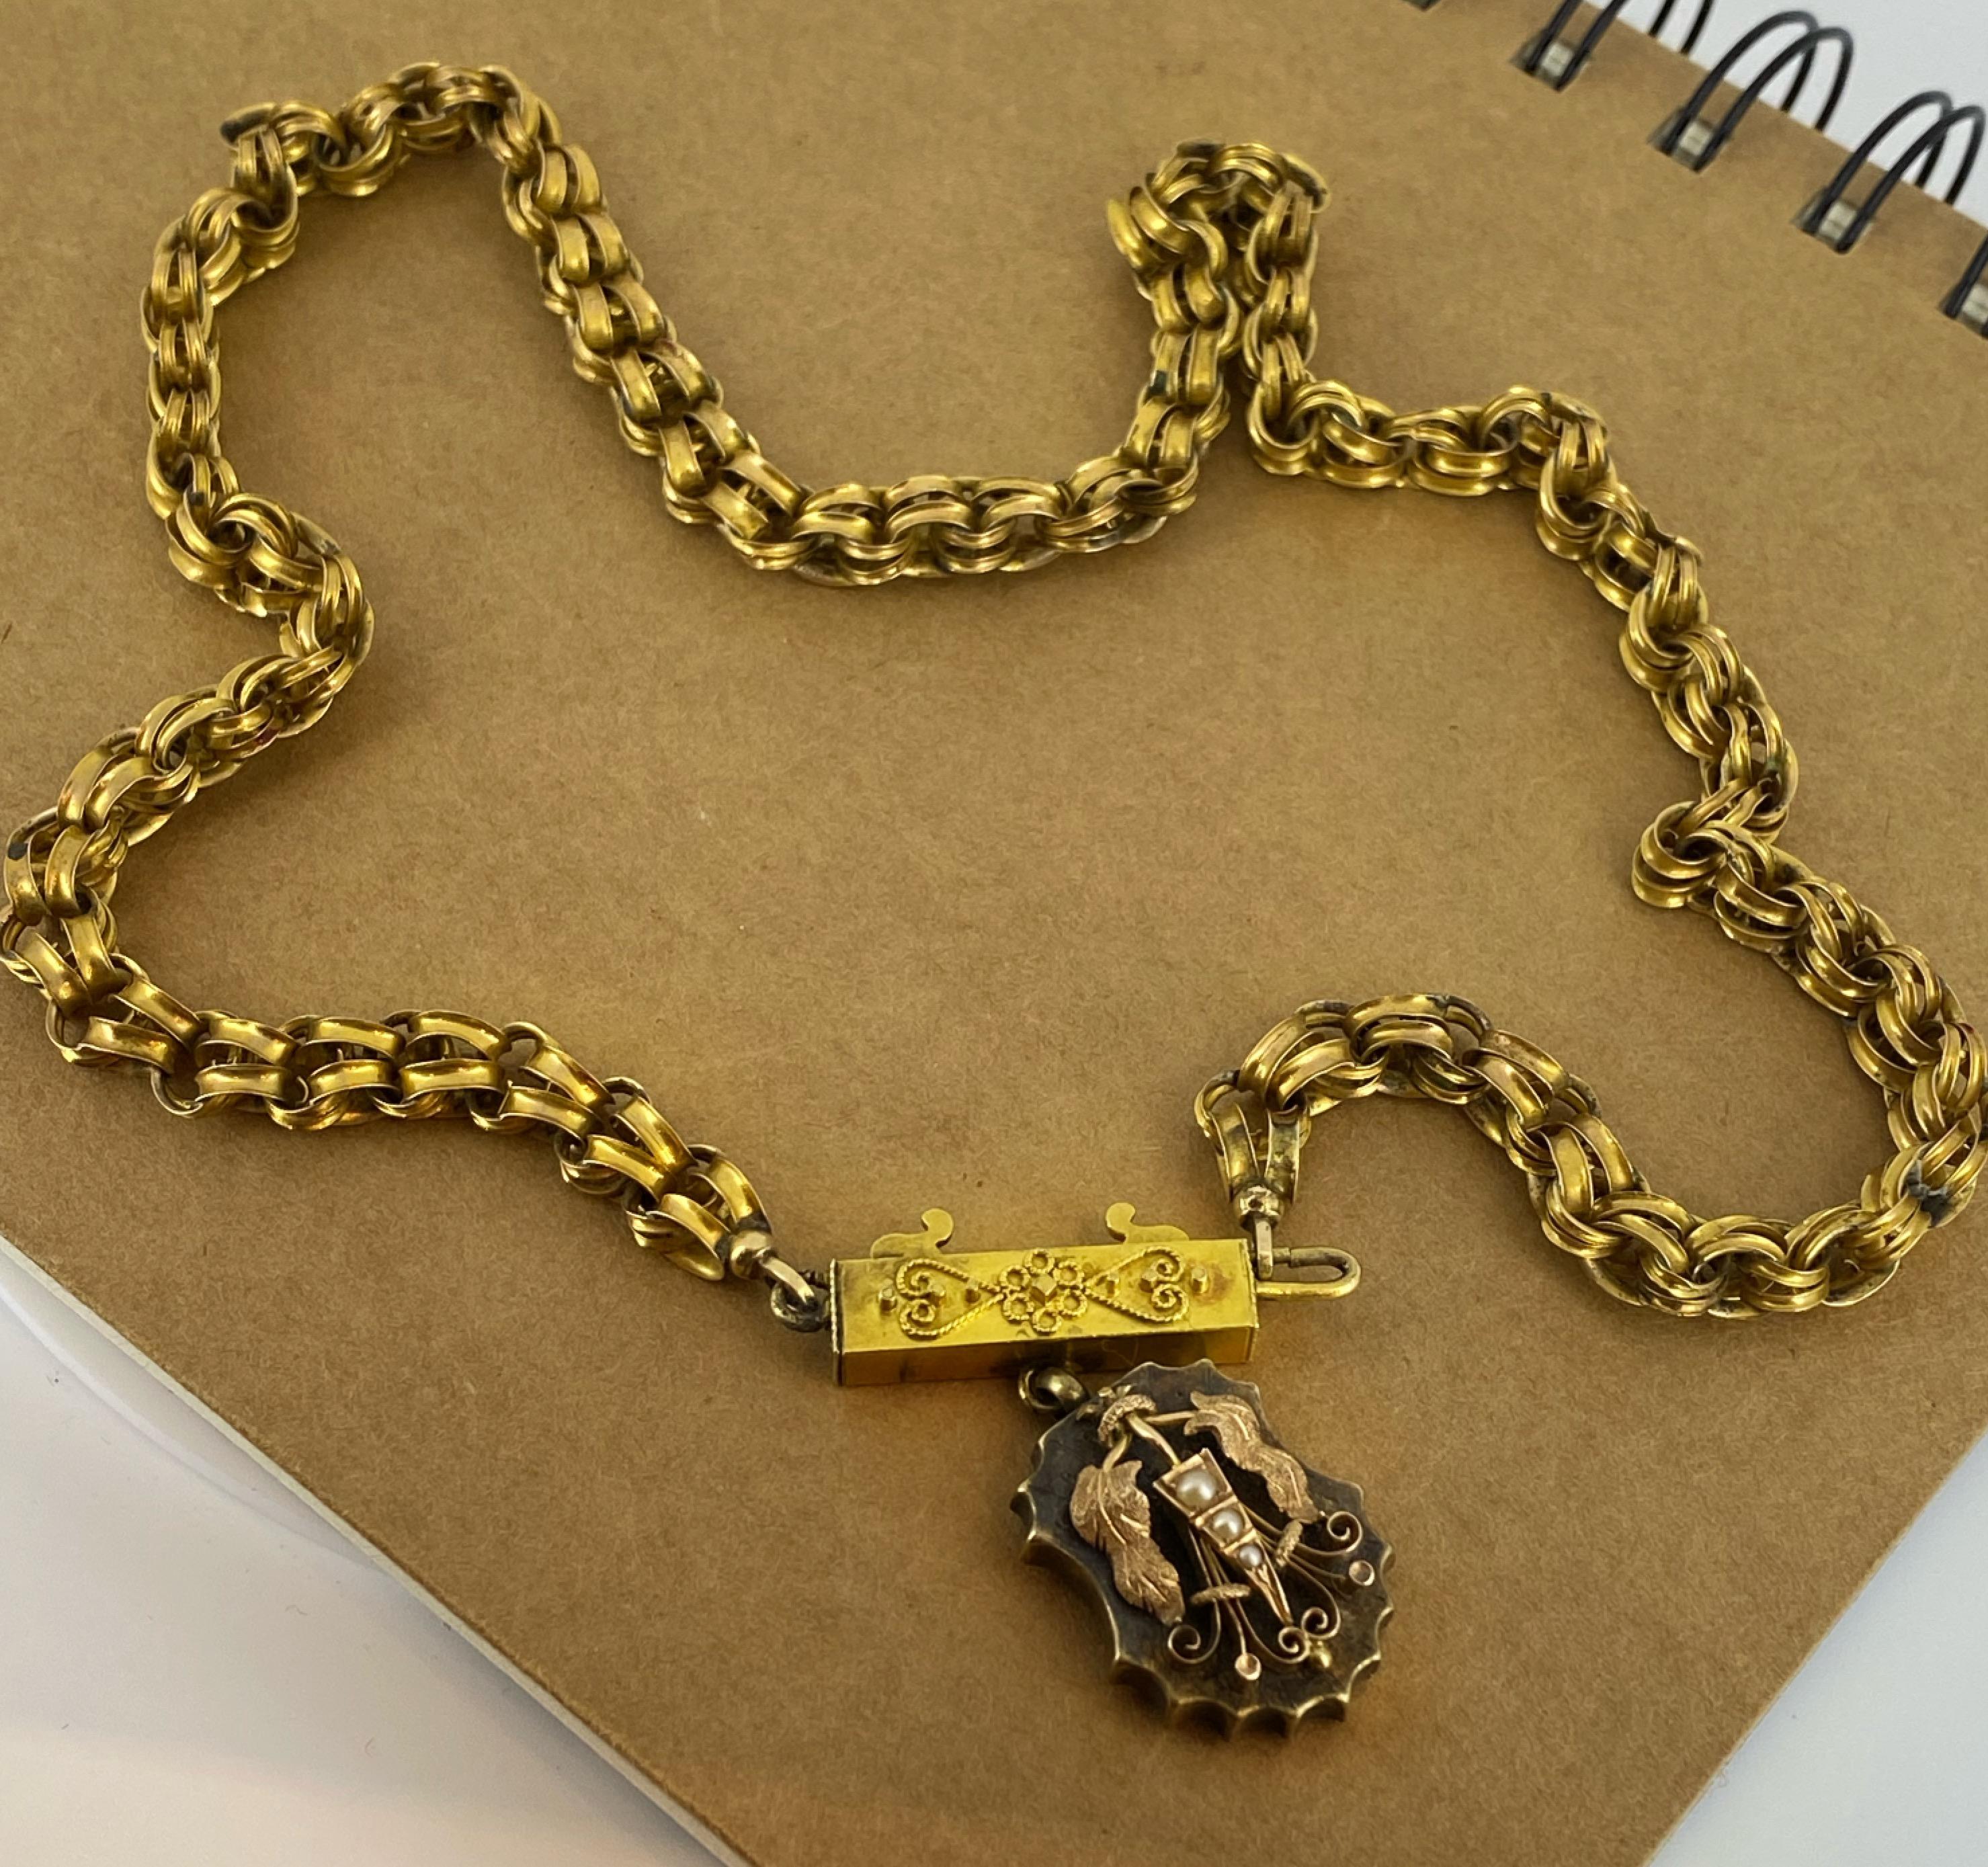 This antique Georgian necklace is a true treasure & a rare find...

Crafted in 15K yellow gold, 
it features a shield-shaped locket pendant, 
designed as a shield, 
intricately decorated with leaves (in rose gold), scrolls & 
adorned with 3 seed